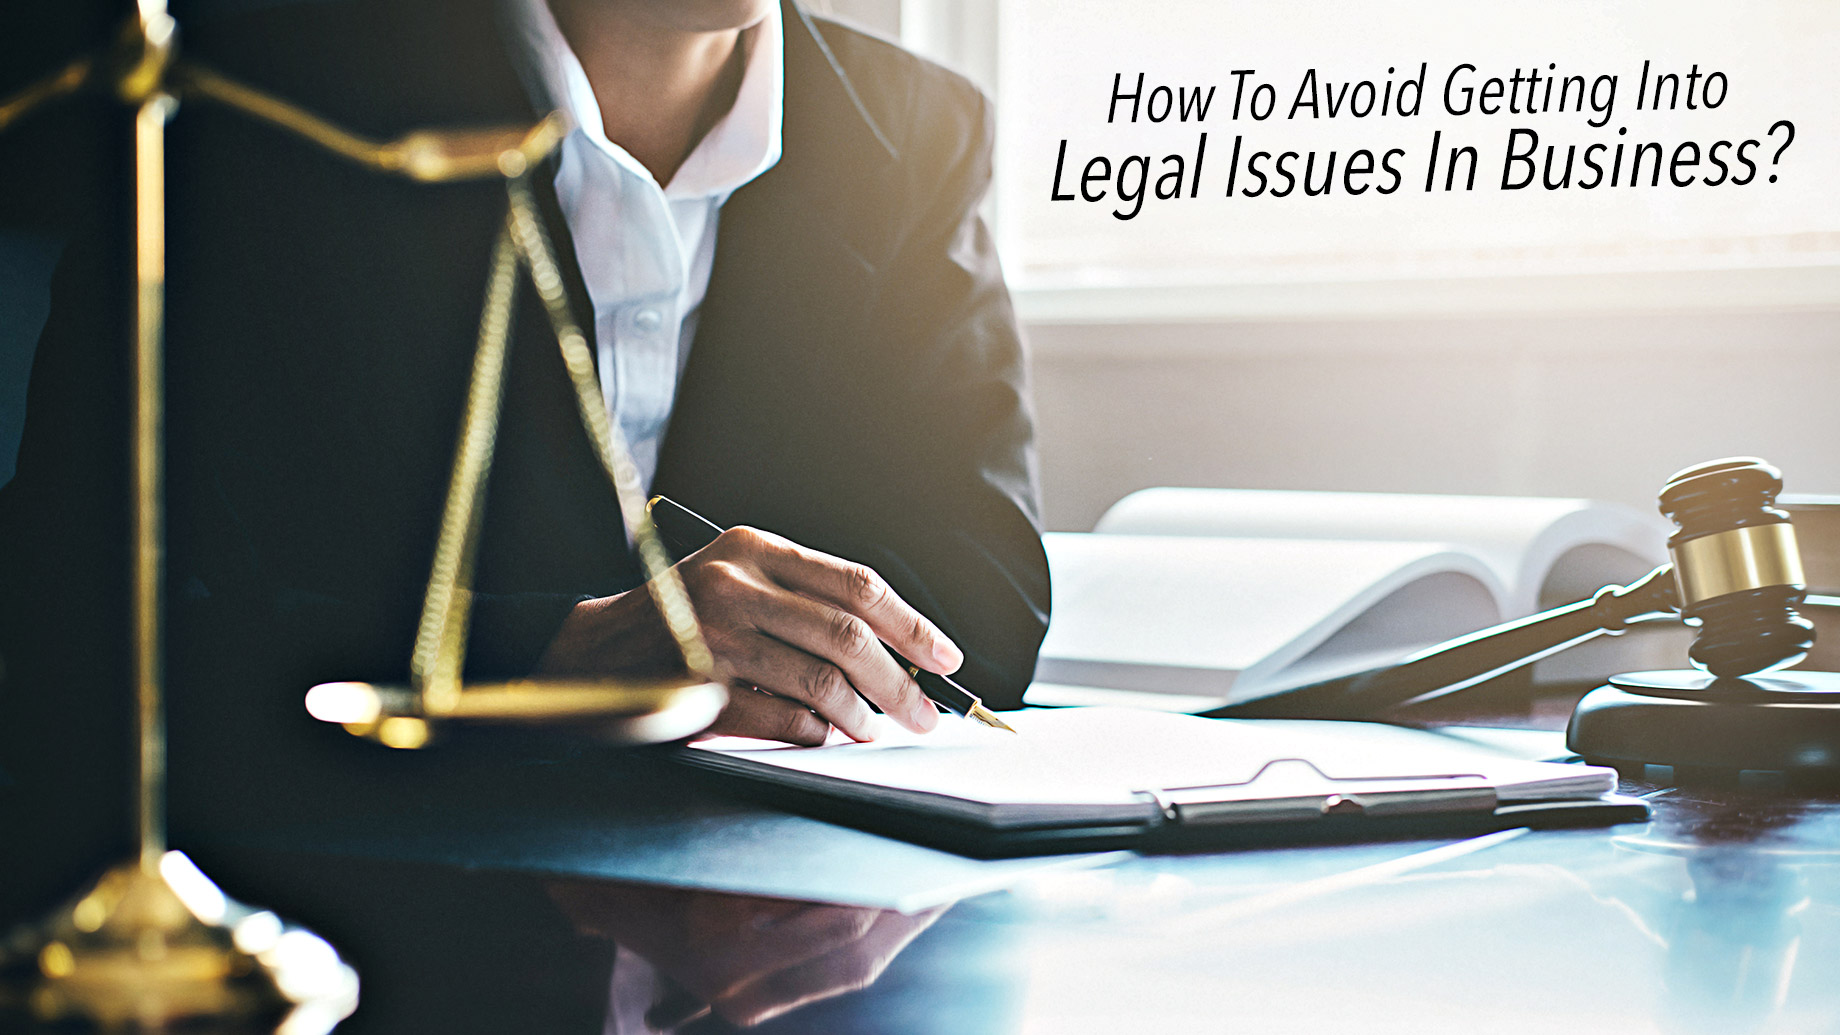 How To Avoid Getting Into Legal Issues In Business?